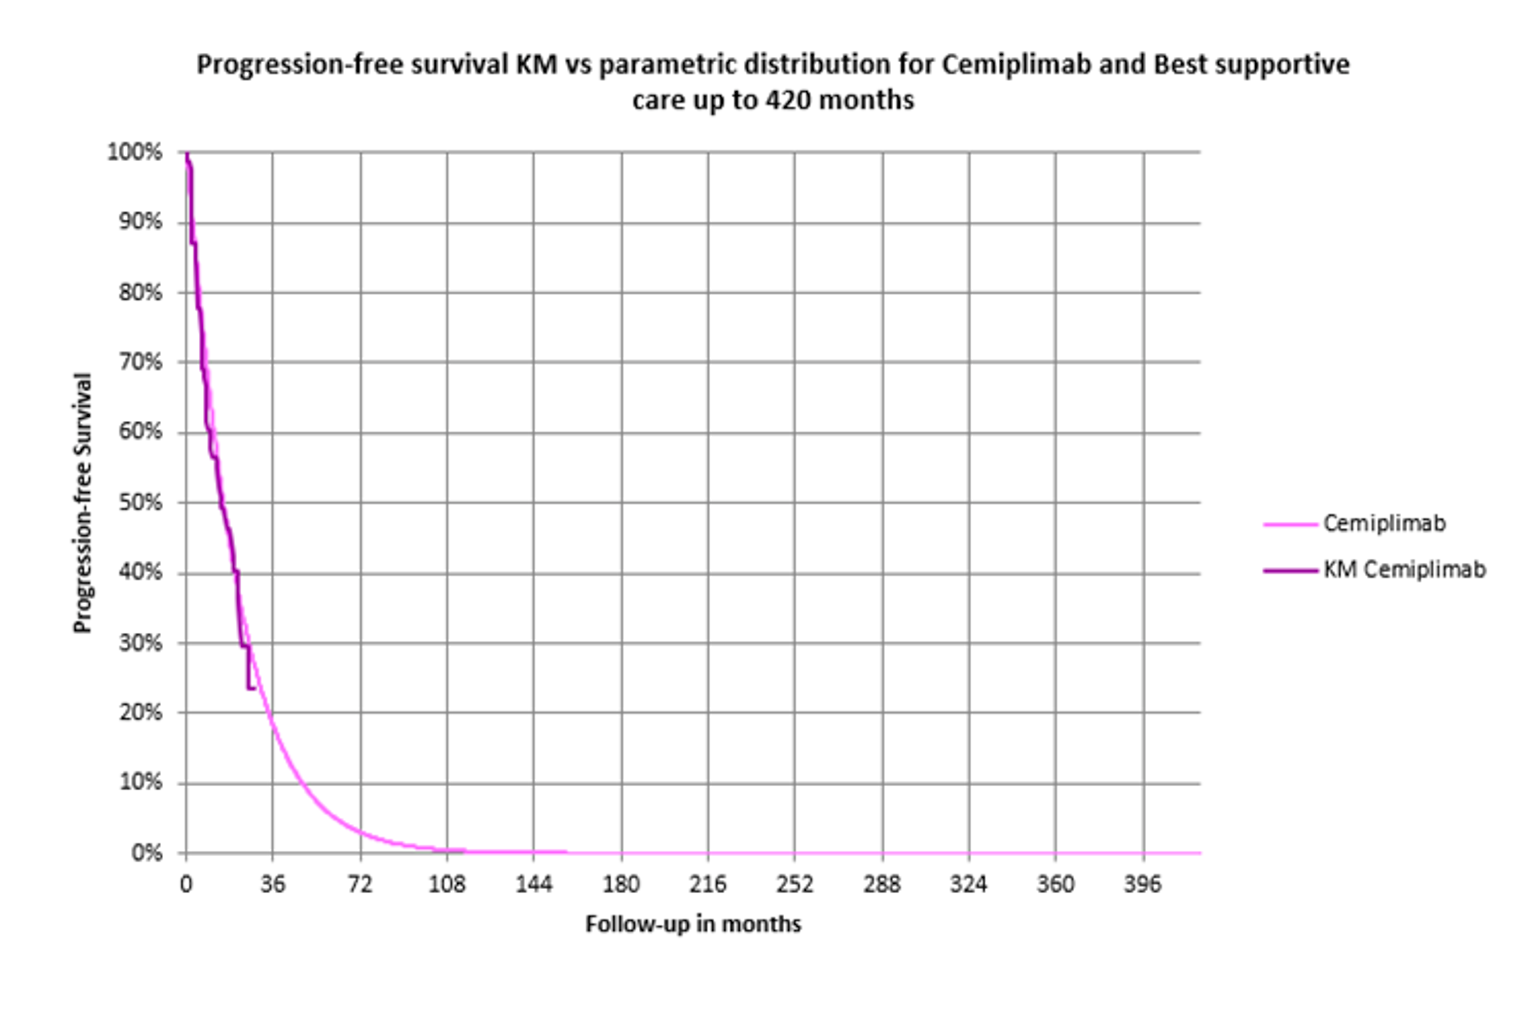 This graph shows 1 KM curve for PFS of cemiplimab. The KM curve for cemiplimab is based on Study 1620 (n = 84, mean age = 69). A survival curve was fitted to the KM.